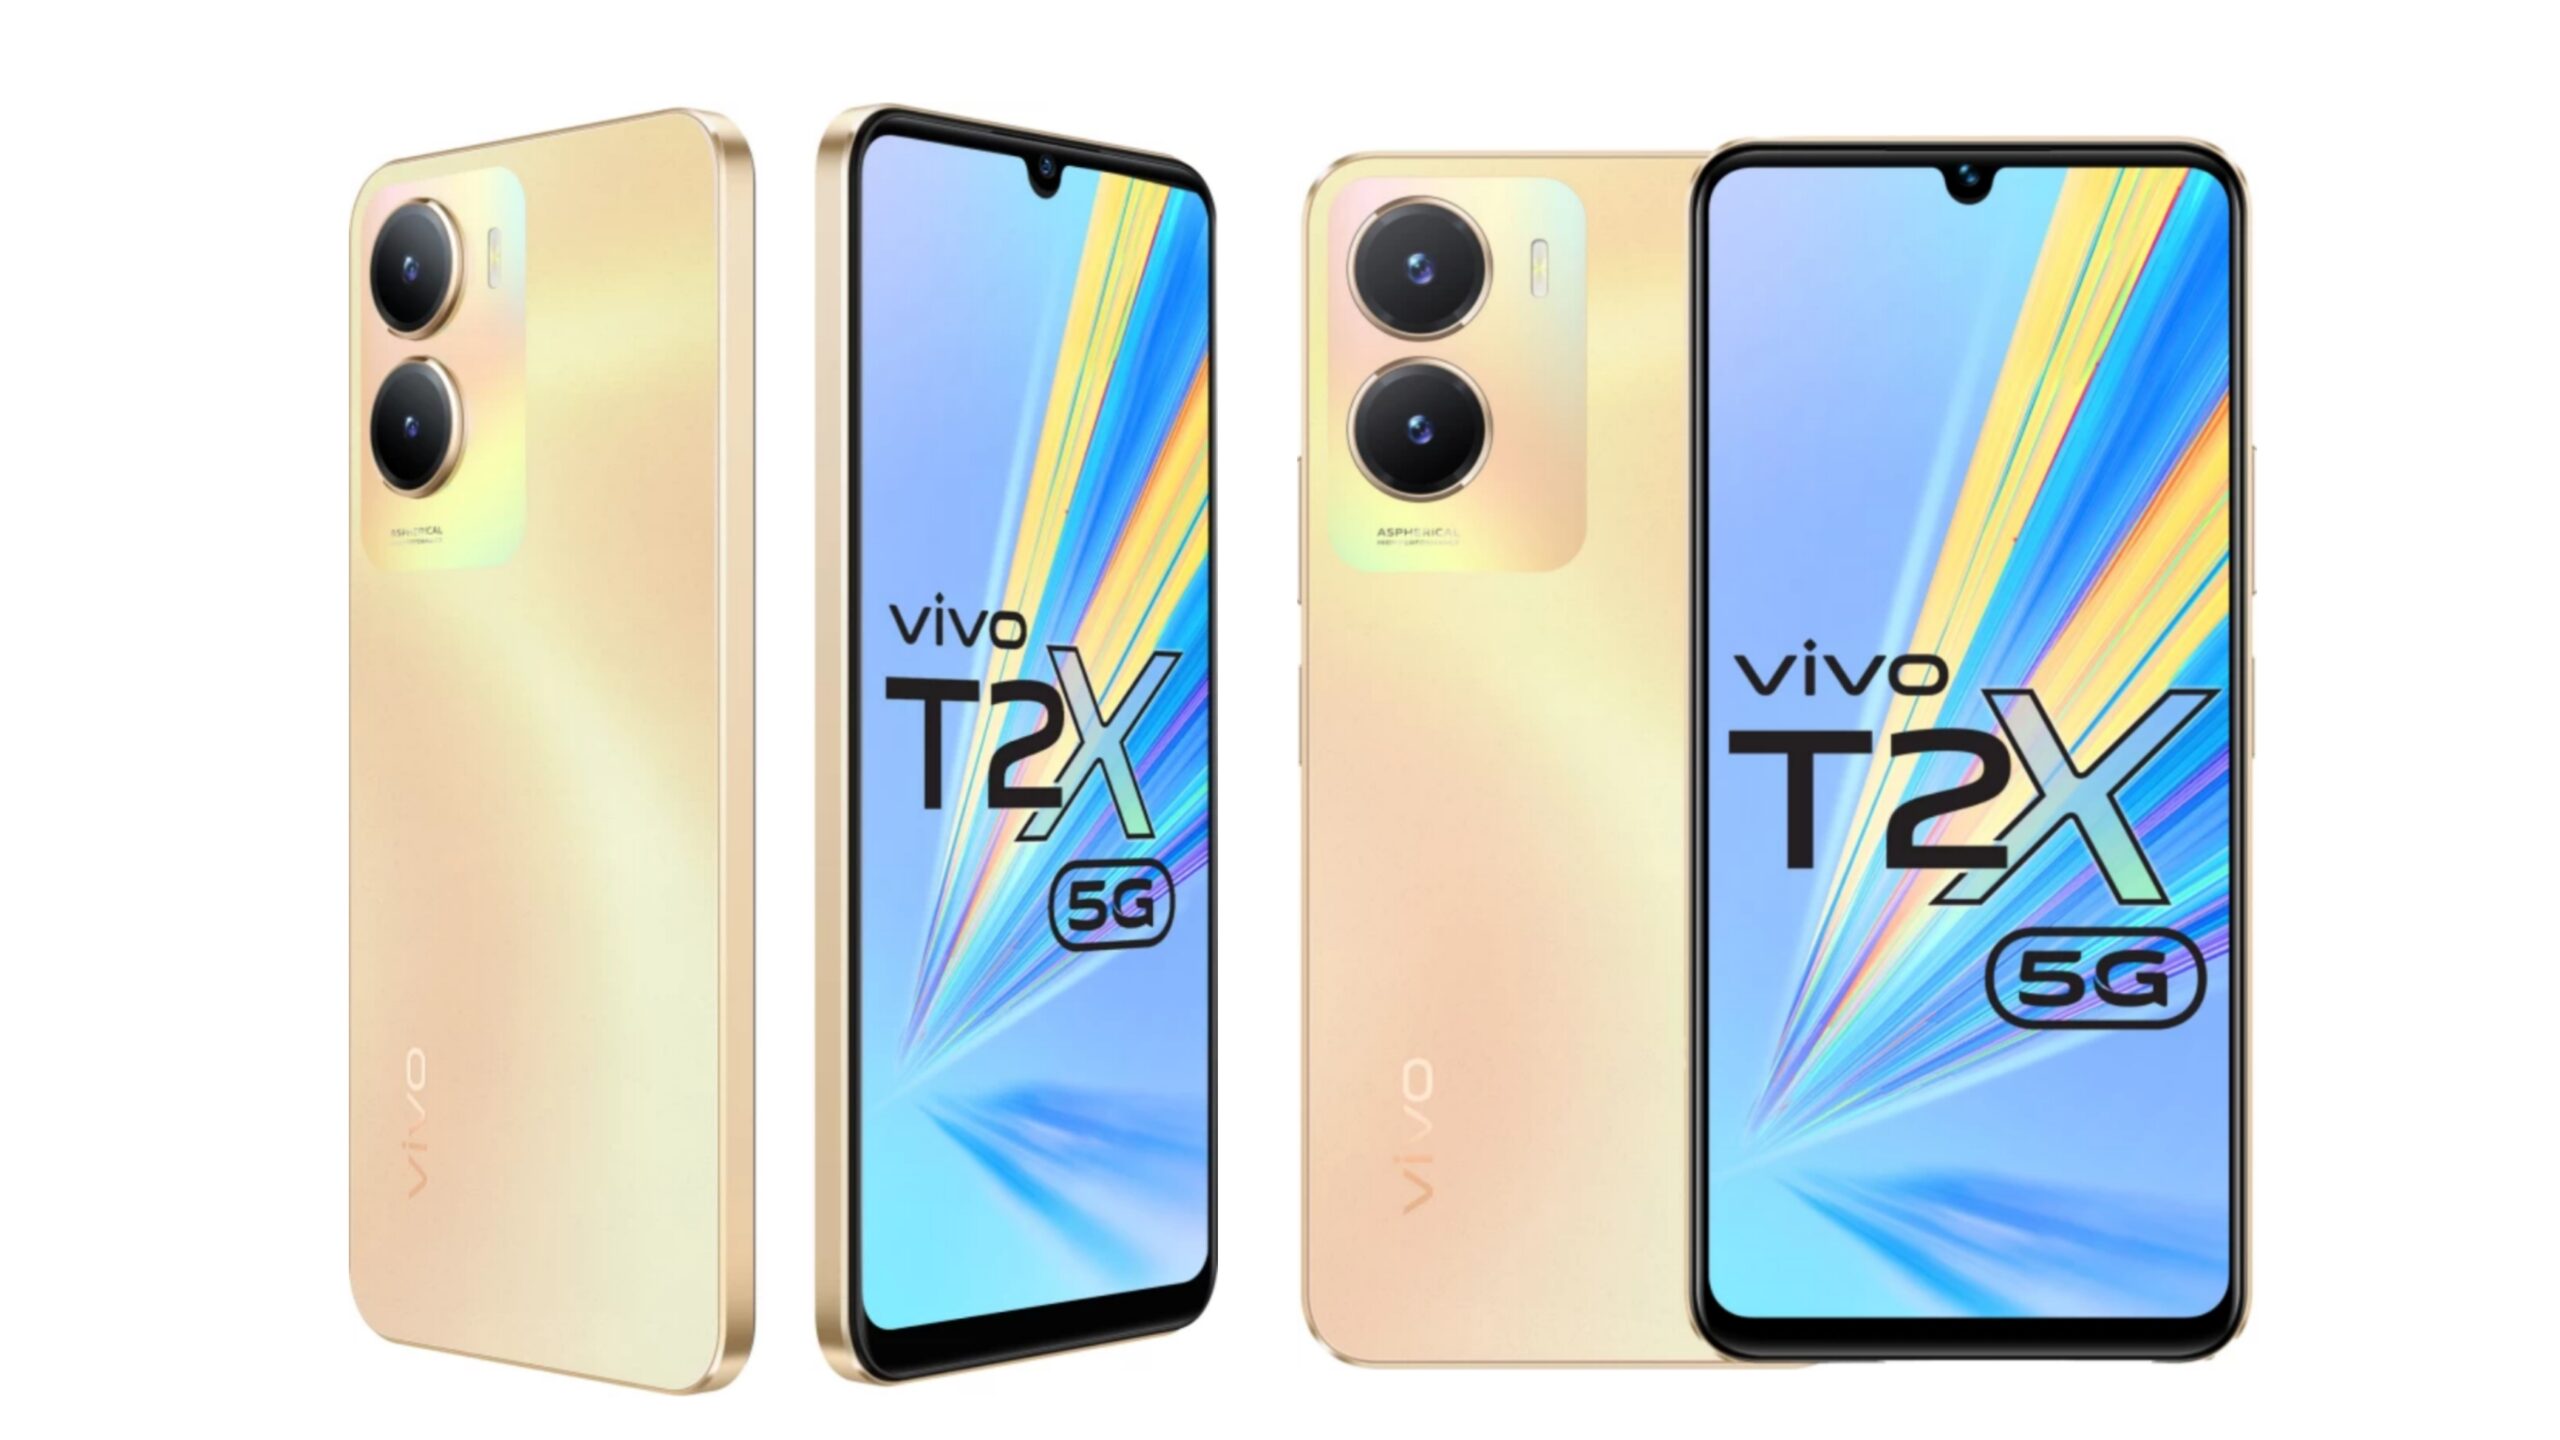 5 Best Phone For Photo Editing Vivo t2x